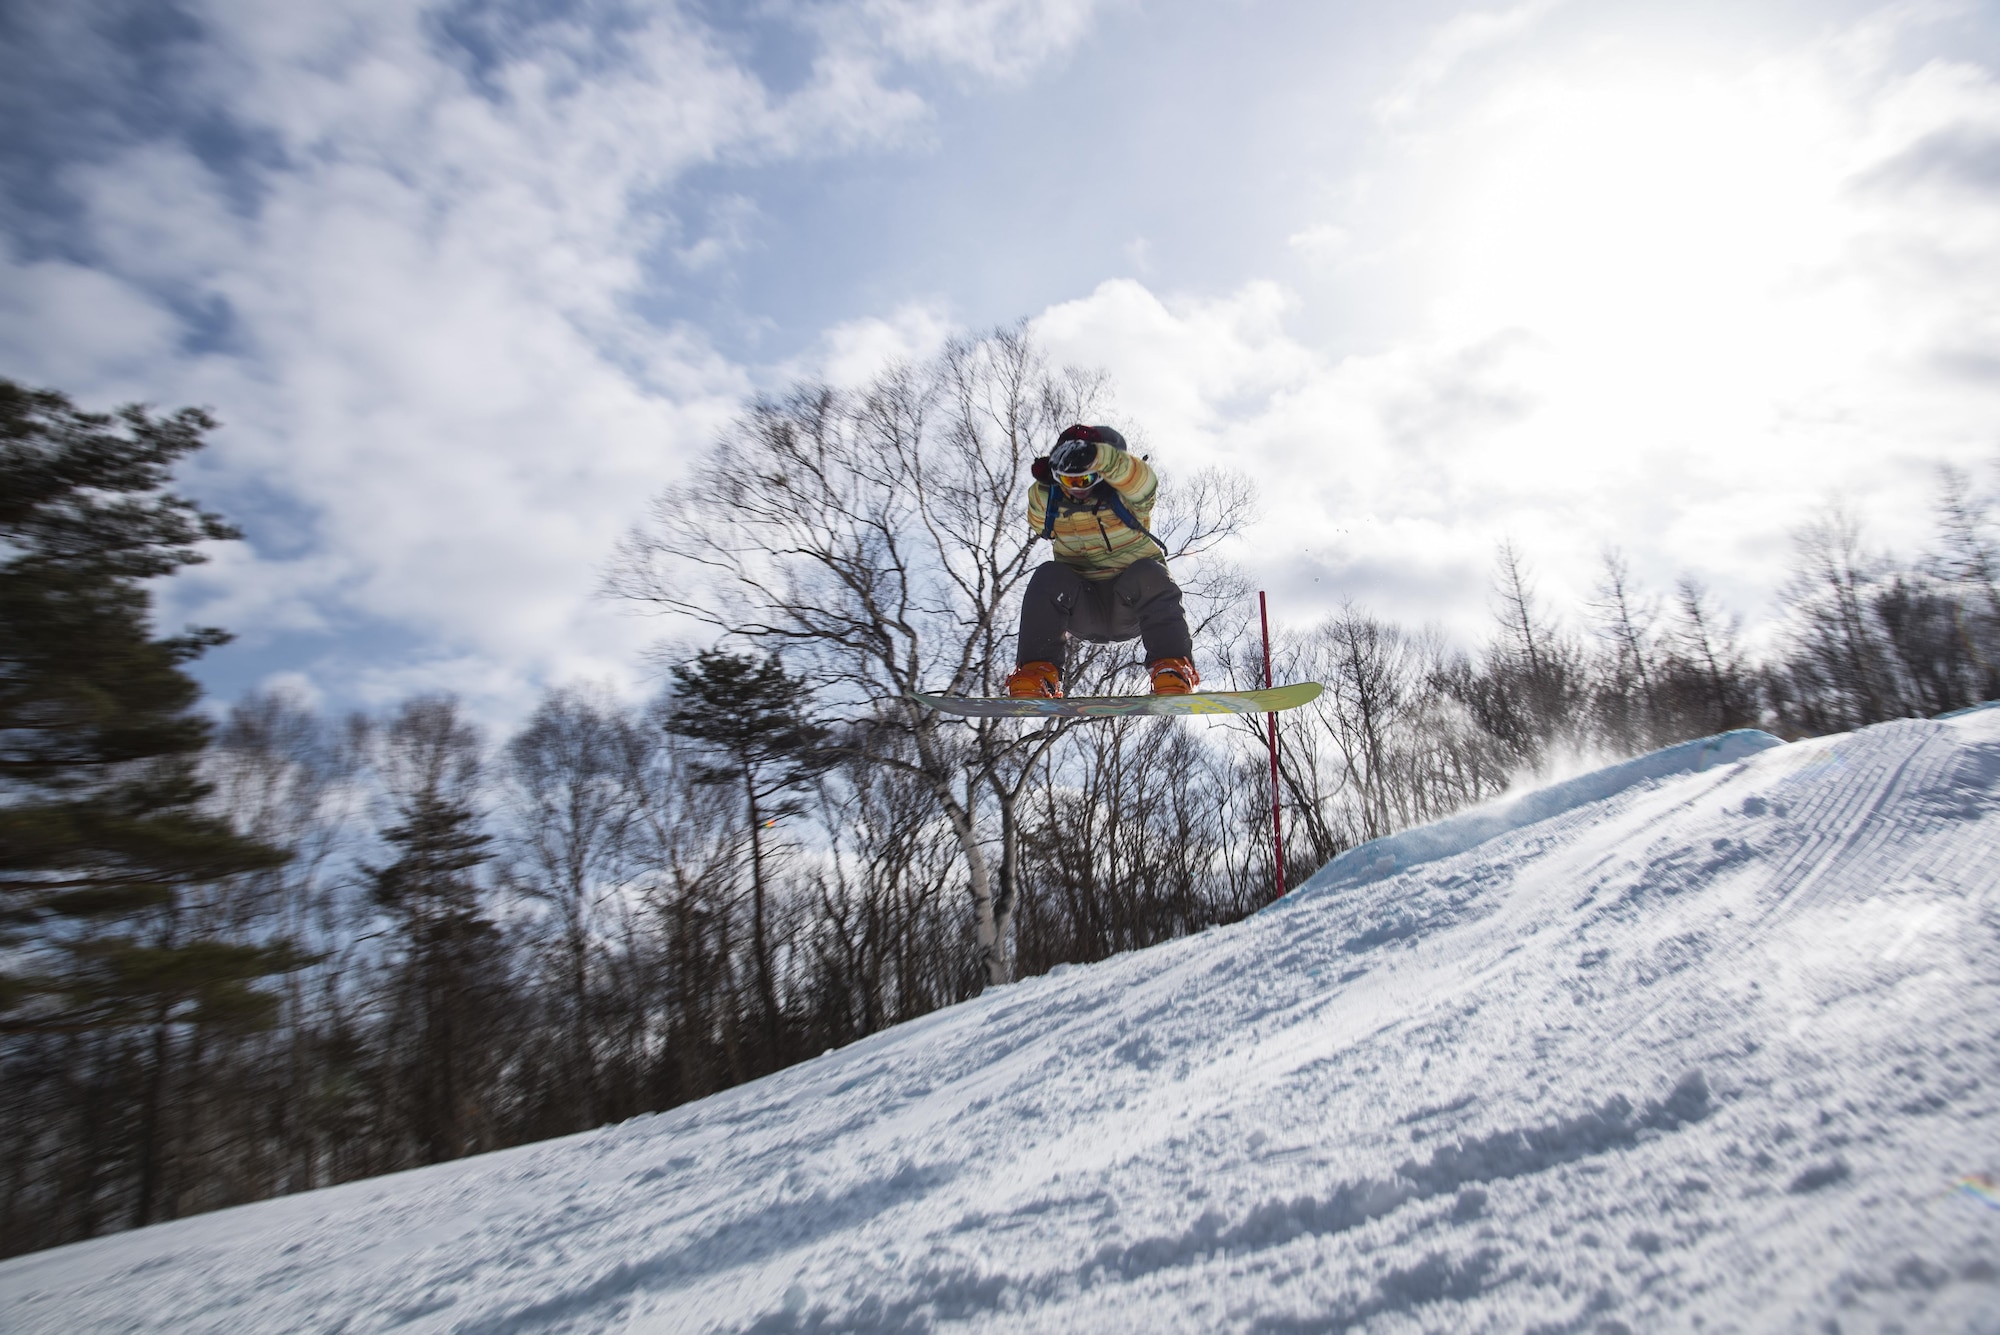 U.S. Air Force Airman 1st Class Alexander Crutchfield, a 35th Maintenance Squadron structures technician, makes a jump at a ski resort in Hachimantai, Japan, Jan. 29, 2017. Airmen from many shops had the opportunity to ski or snowboard to practice the four Air Force resiliency pillars including: physical, spiritual, mental and social domains. (U.S. Air Force photo by Airman 1st Class Sadie Colbert)